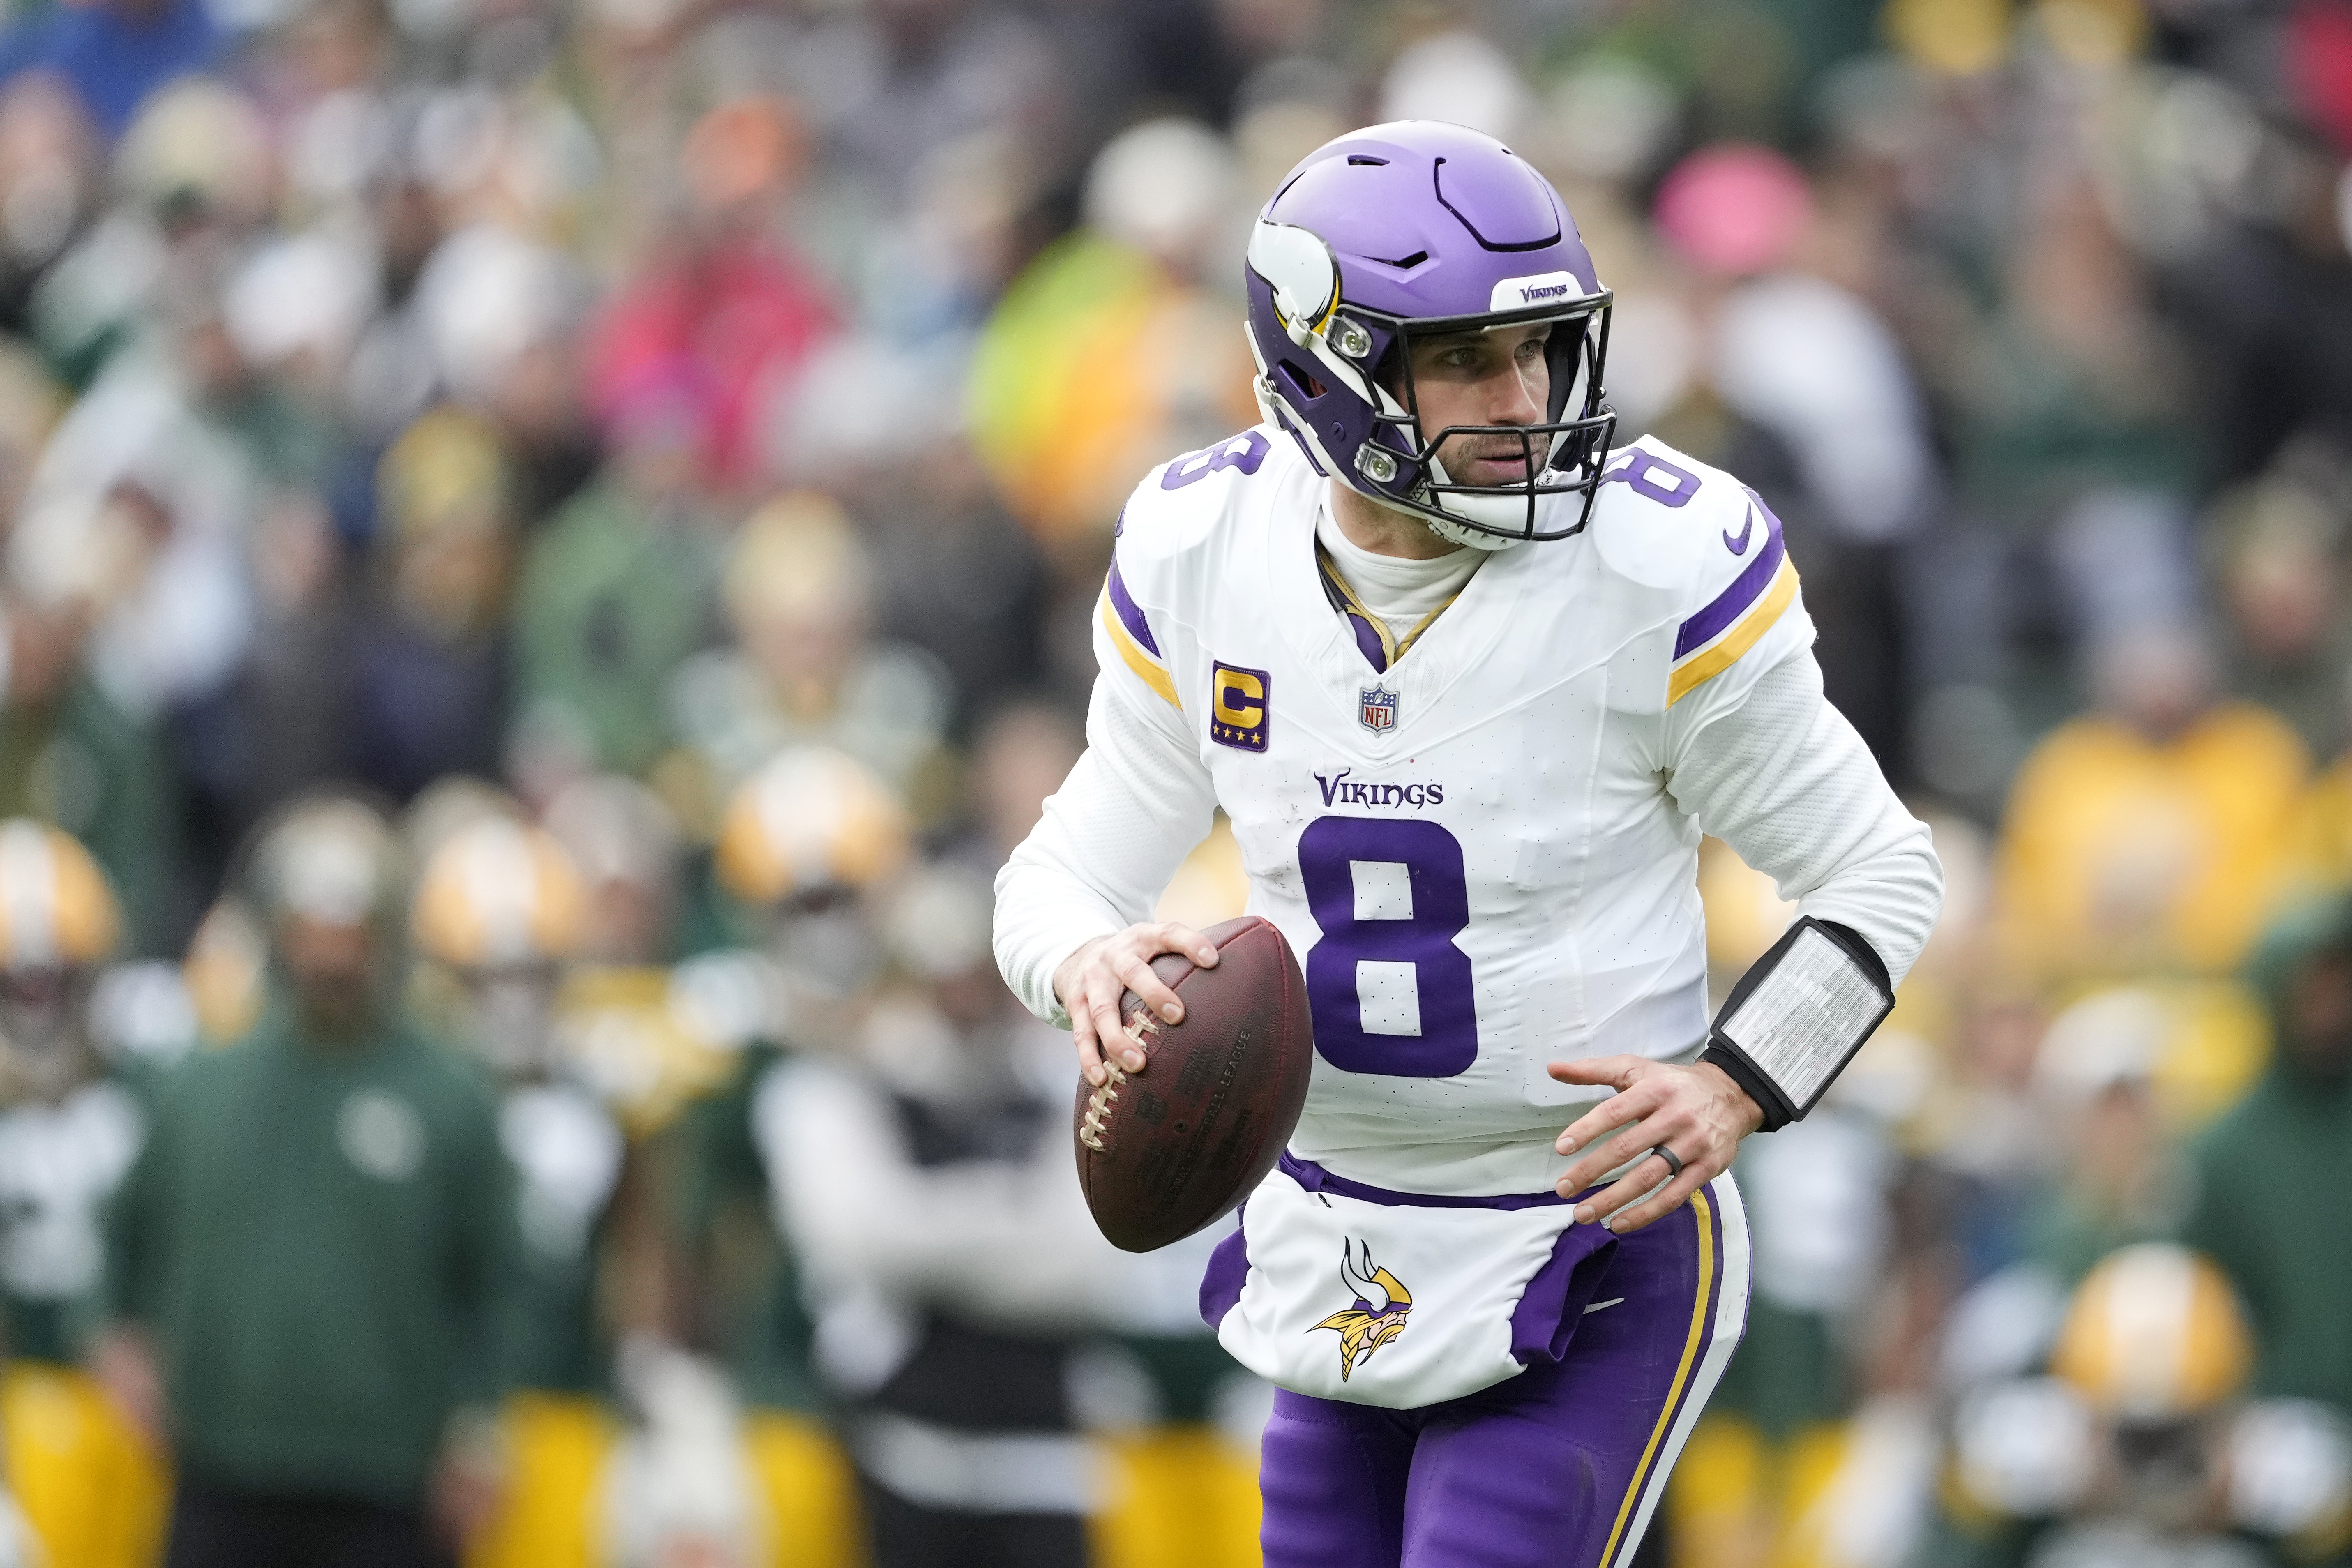 Kirk Cousins #8 of the Minnesota Vikings looks to throw a pass against the Green Bay Packers in the second half at Lambeau Field on October 29, 2023 in Green Bay, Wisconsin.